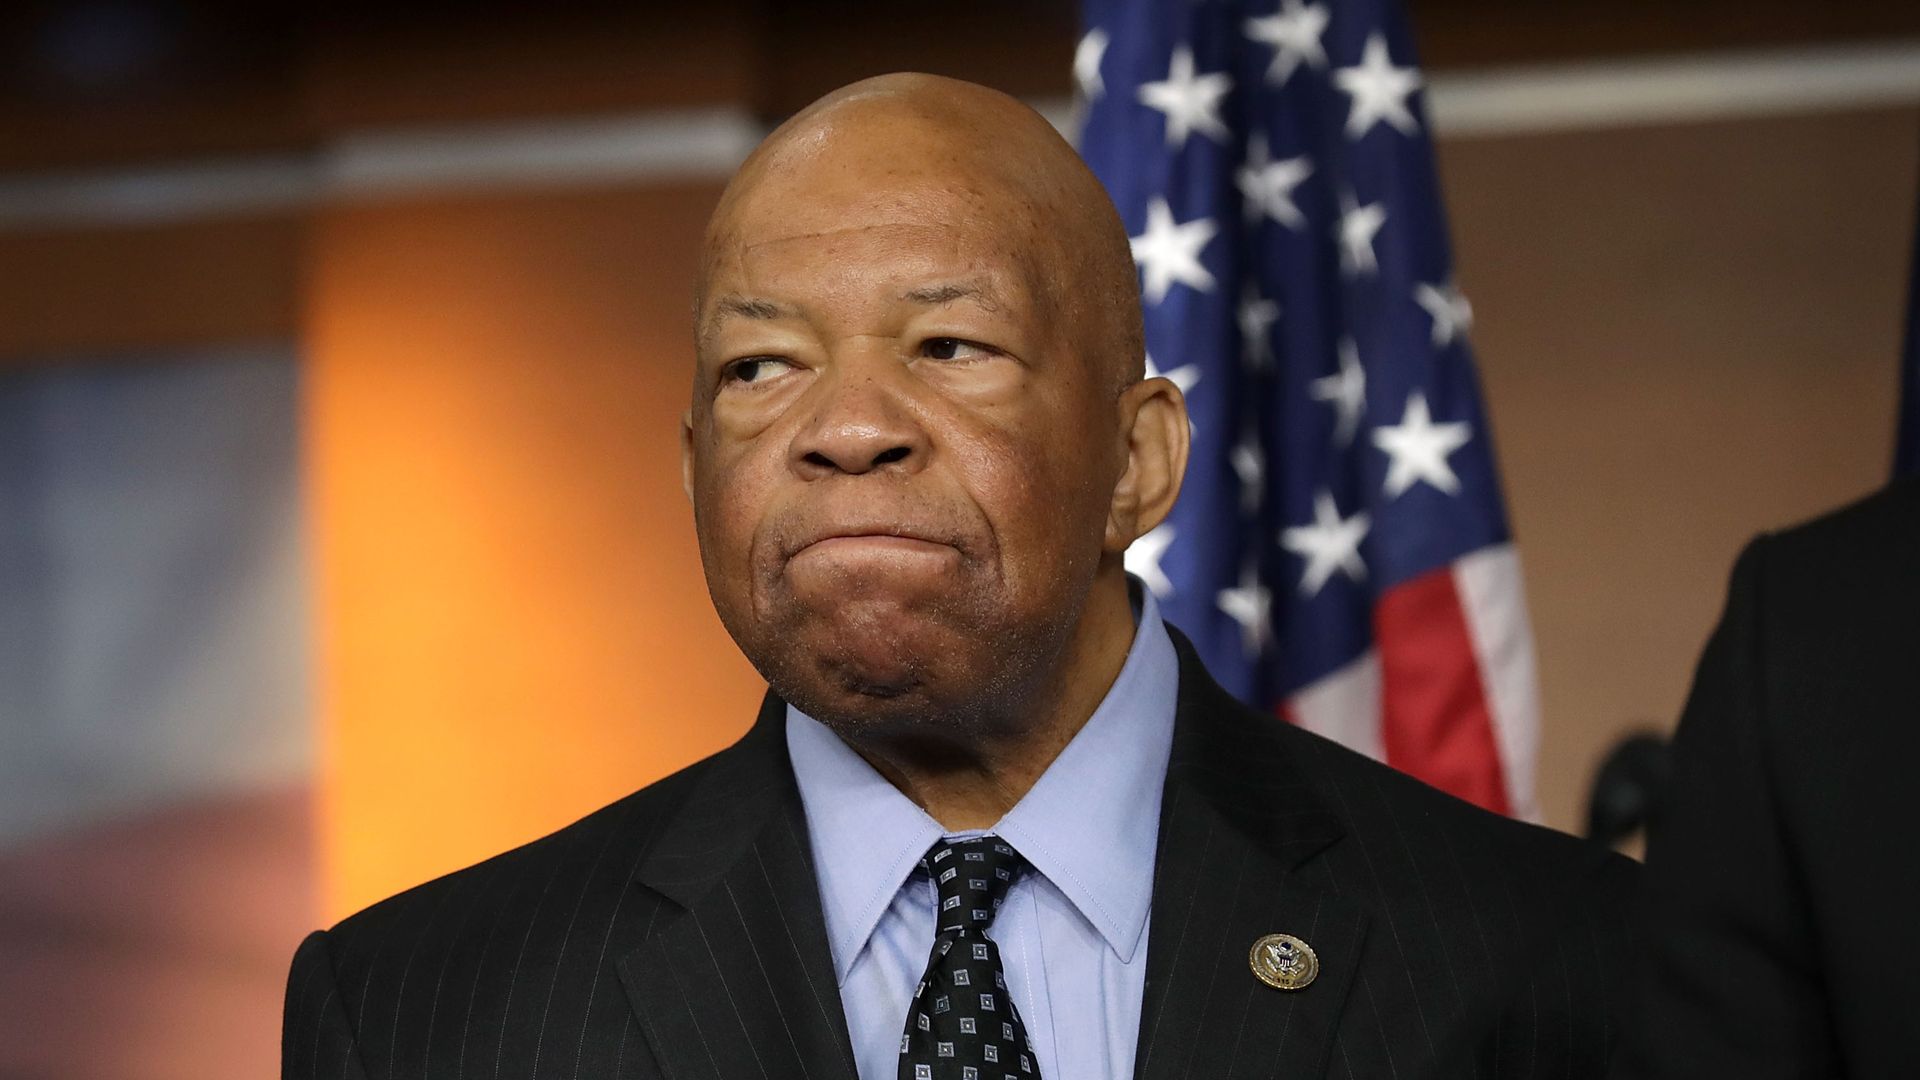 House Oversight Committee Chairman Elijah Cummings is postponing holding a former White House official in contempt.